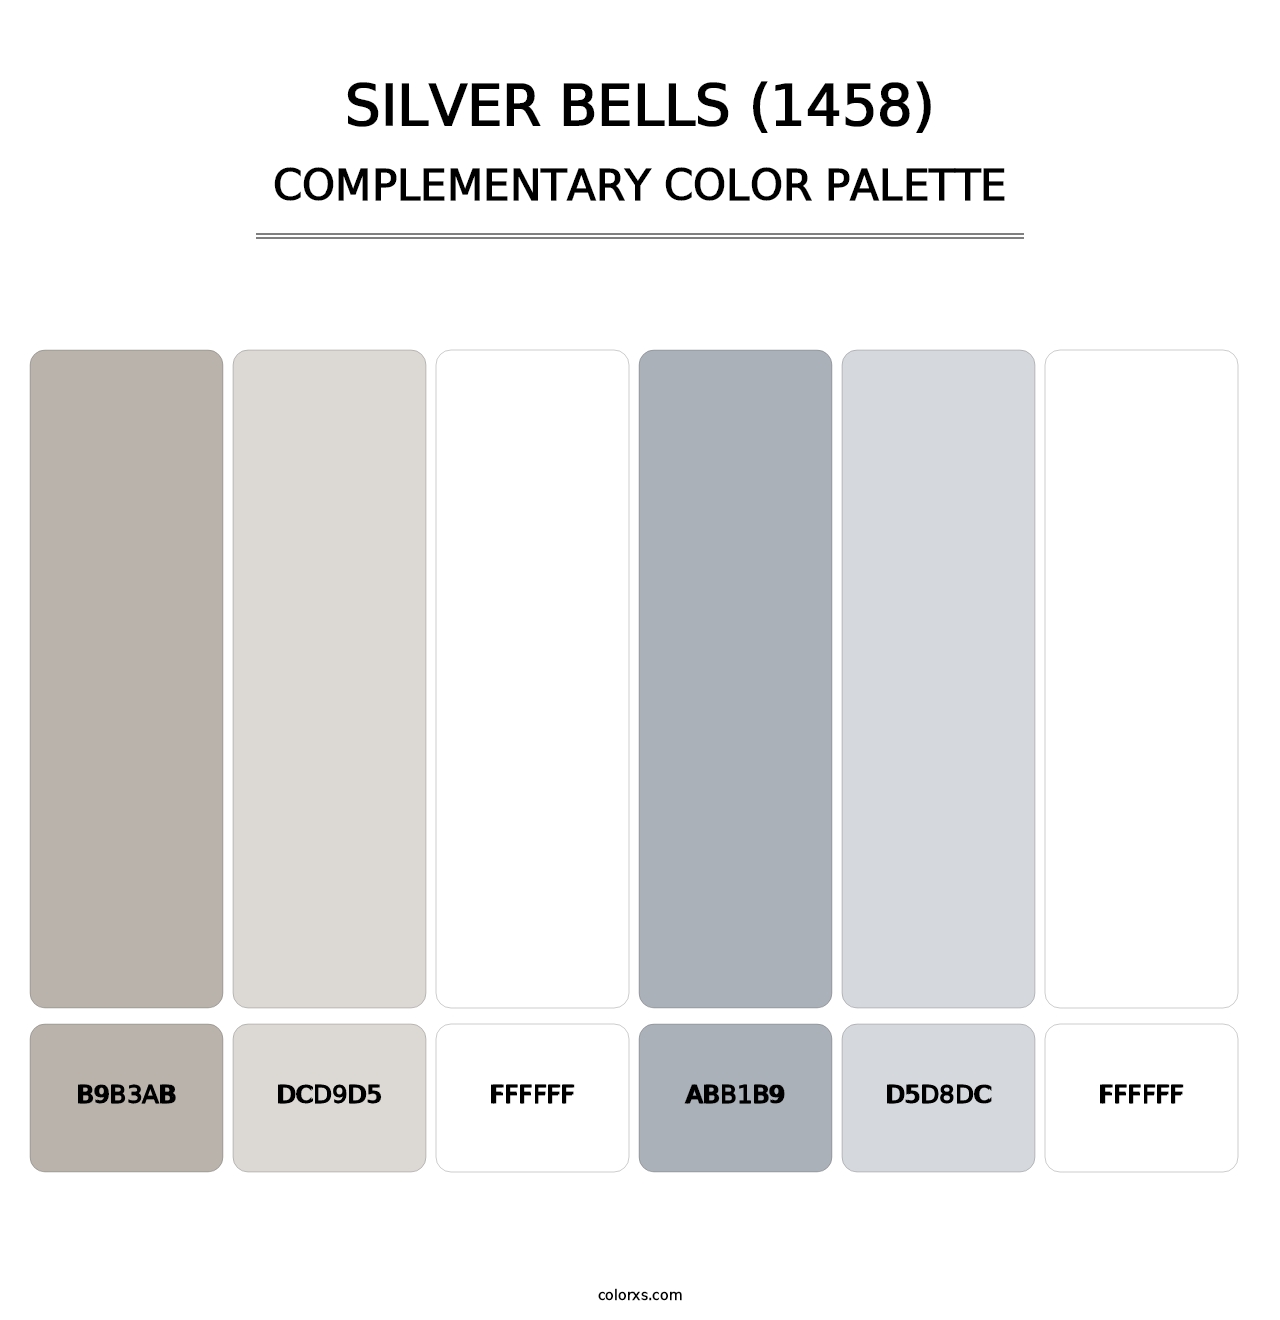 Silver Bells (1458) - Complementary Color Palette